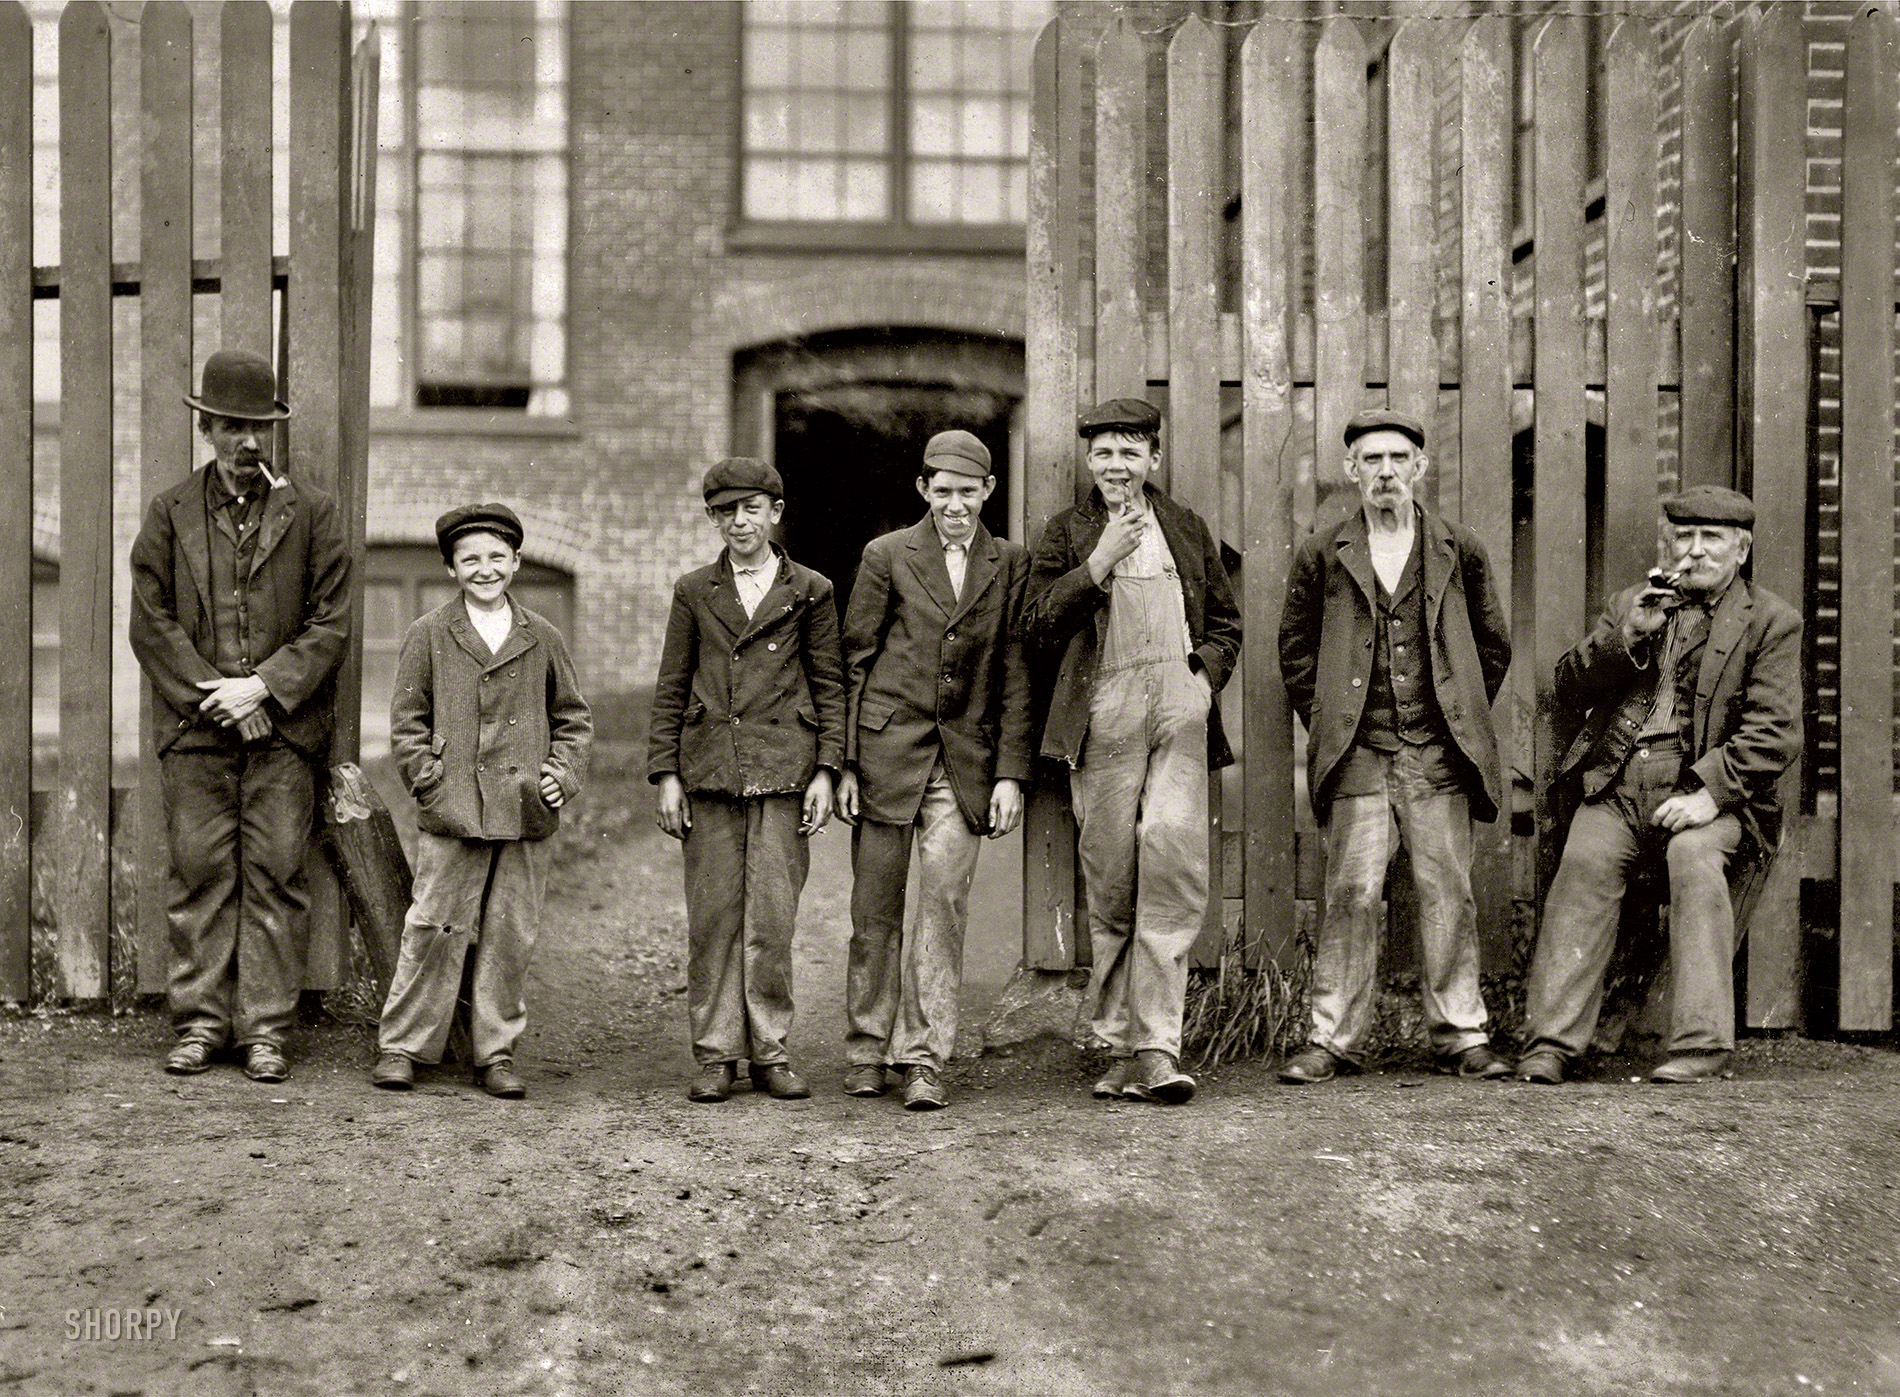 "Noon, June 10, 1909. Parker Mill in Warren, Rhode Island. I saw these and nearly a dozen youngsters who looked to be under 14 at work there that A.M. when I went through the mill as a visitor." Photo by Lewis Wickes Hine. View full size.